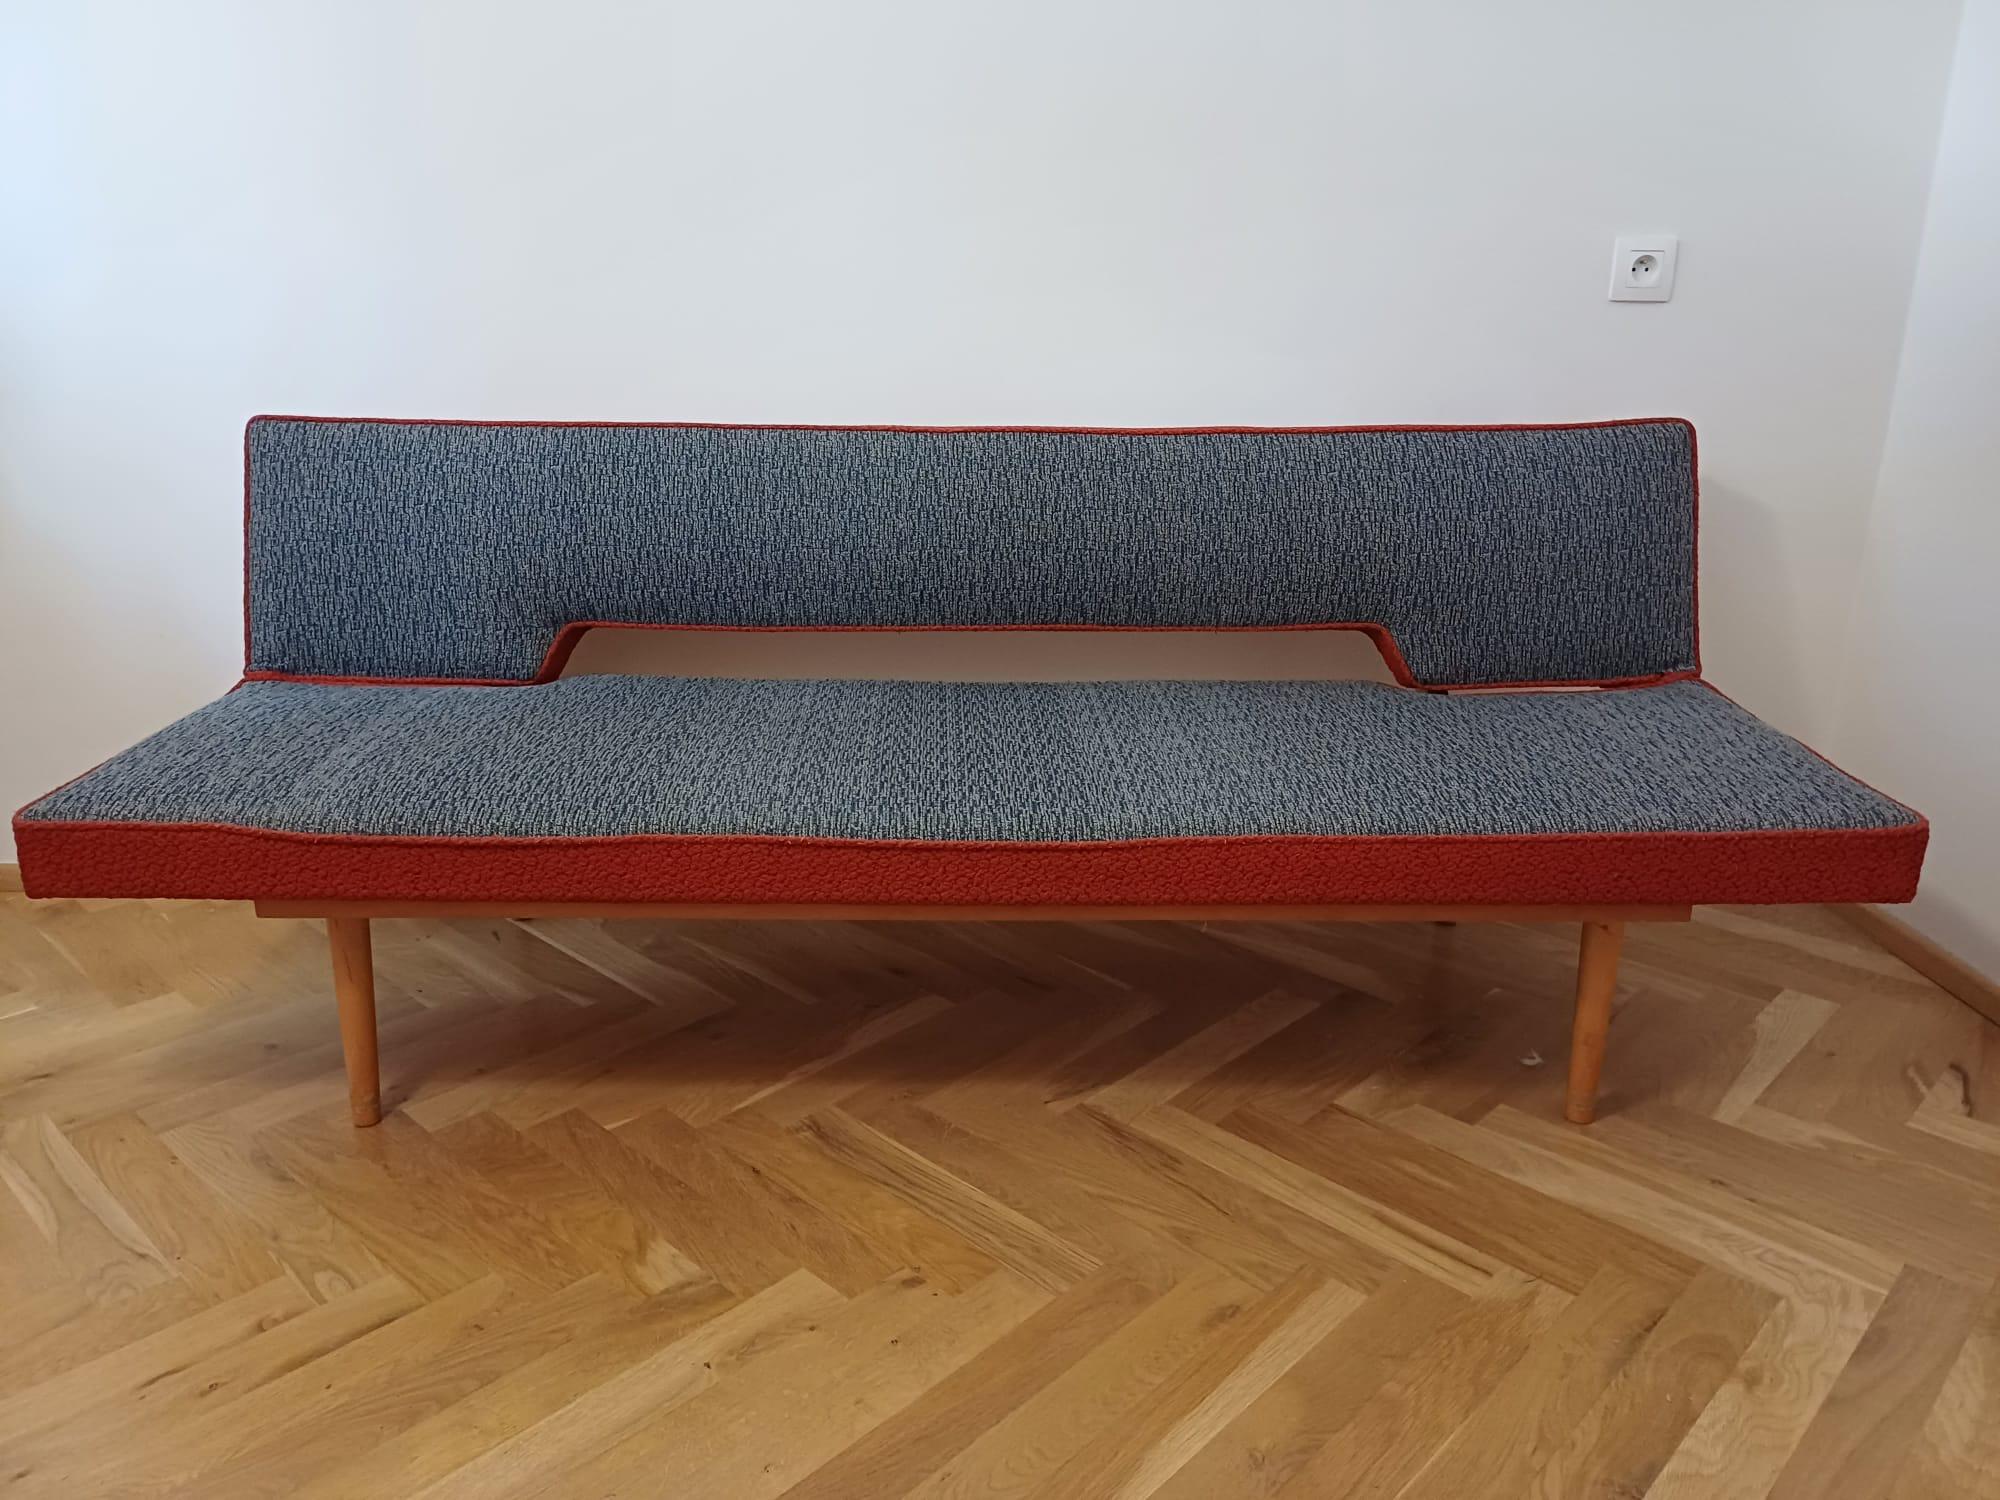 Mid-20th Century Midcentury Sofa or Daybed designed by Miroslav Navratil, 1960s. For Sale